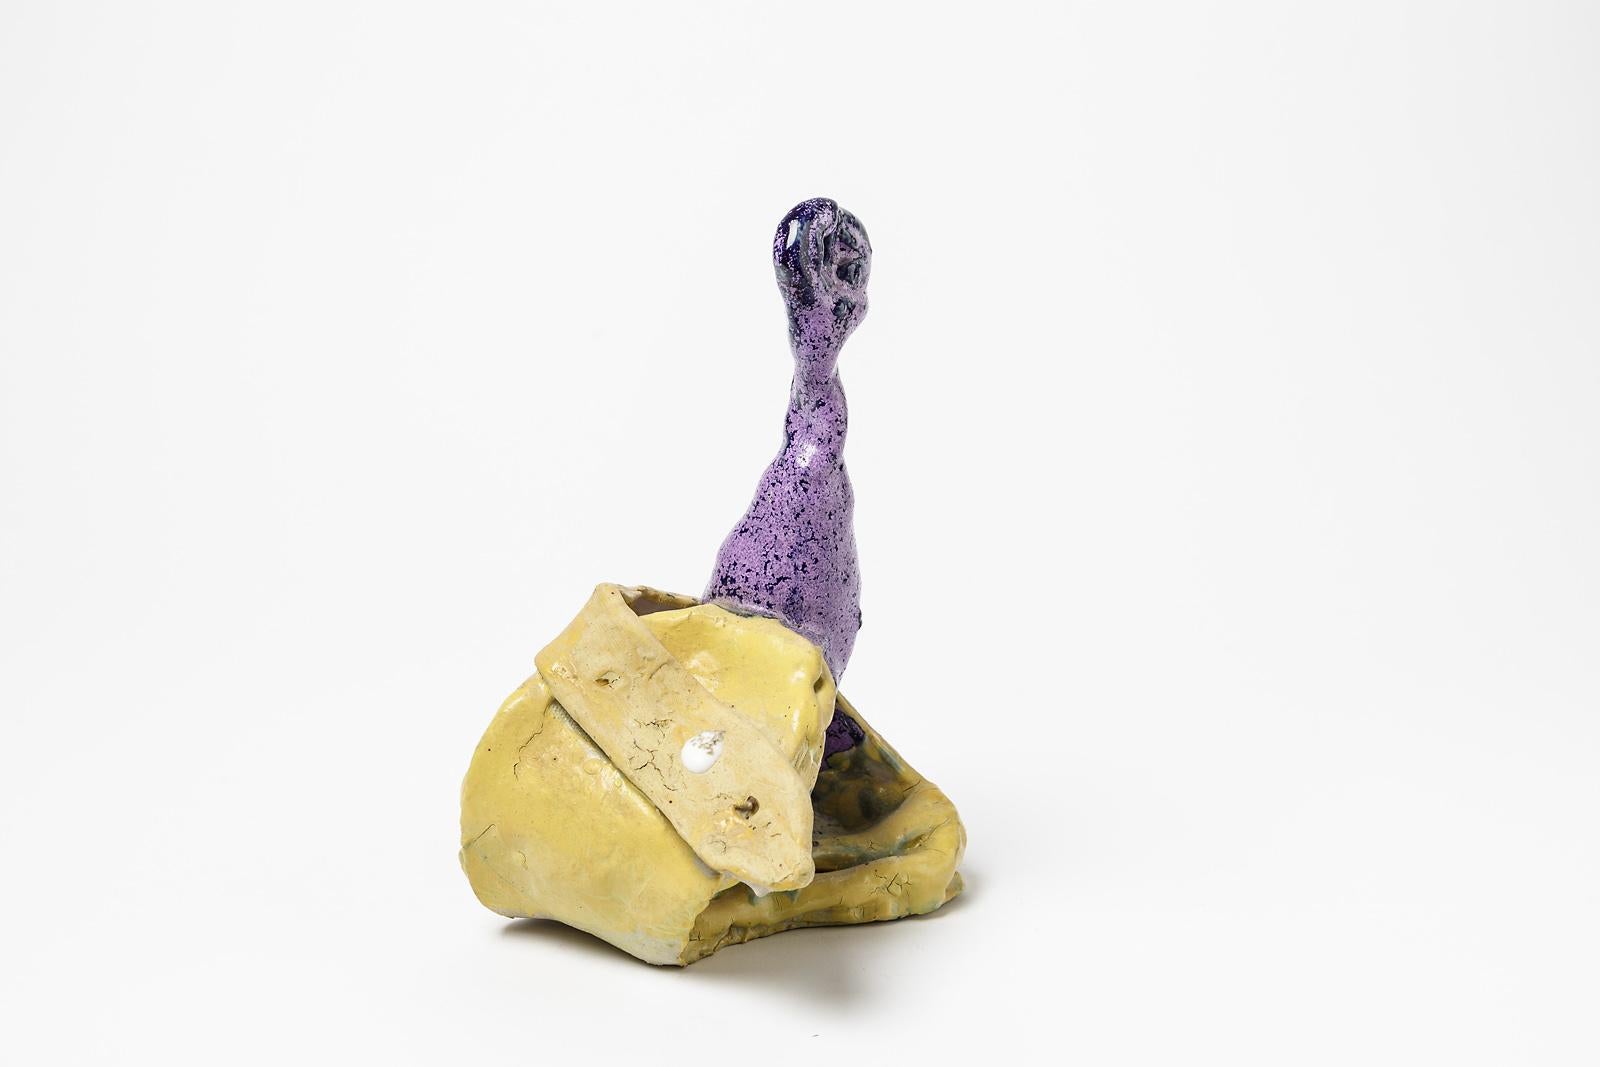 Patrick Crulis

Original abstract ceramic sculpture by the french artist

Yellow and purple ceramic glazes colors

Signed under the base

Provenance: French art gallery

Measures: Height: 25cm, large: 20cm, depth: 16cm.